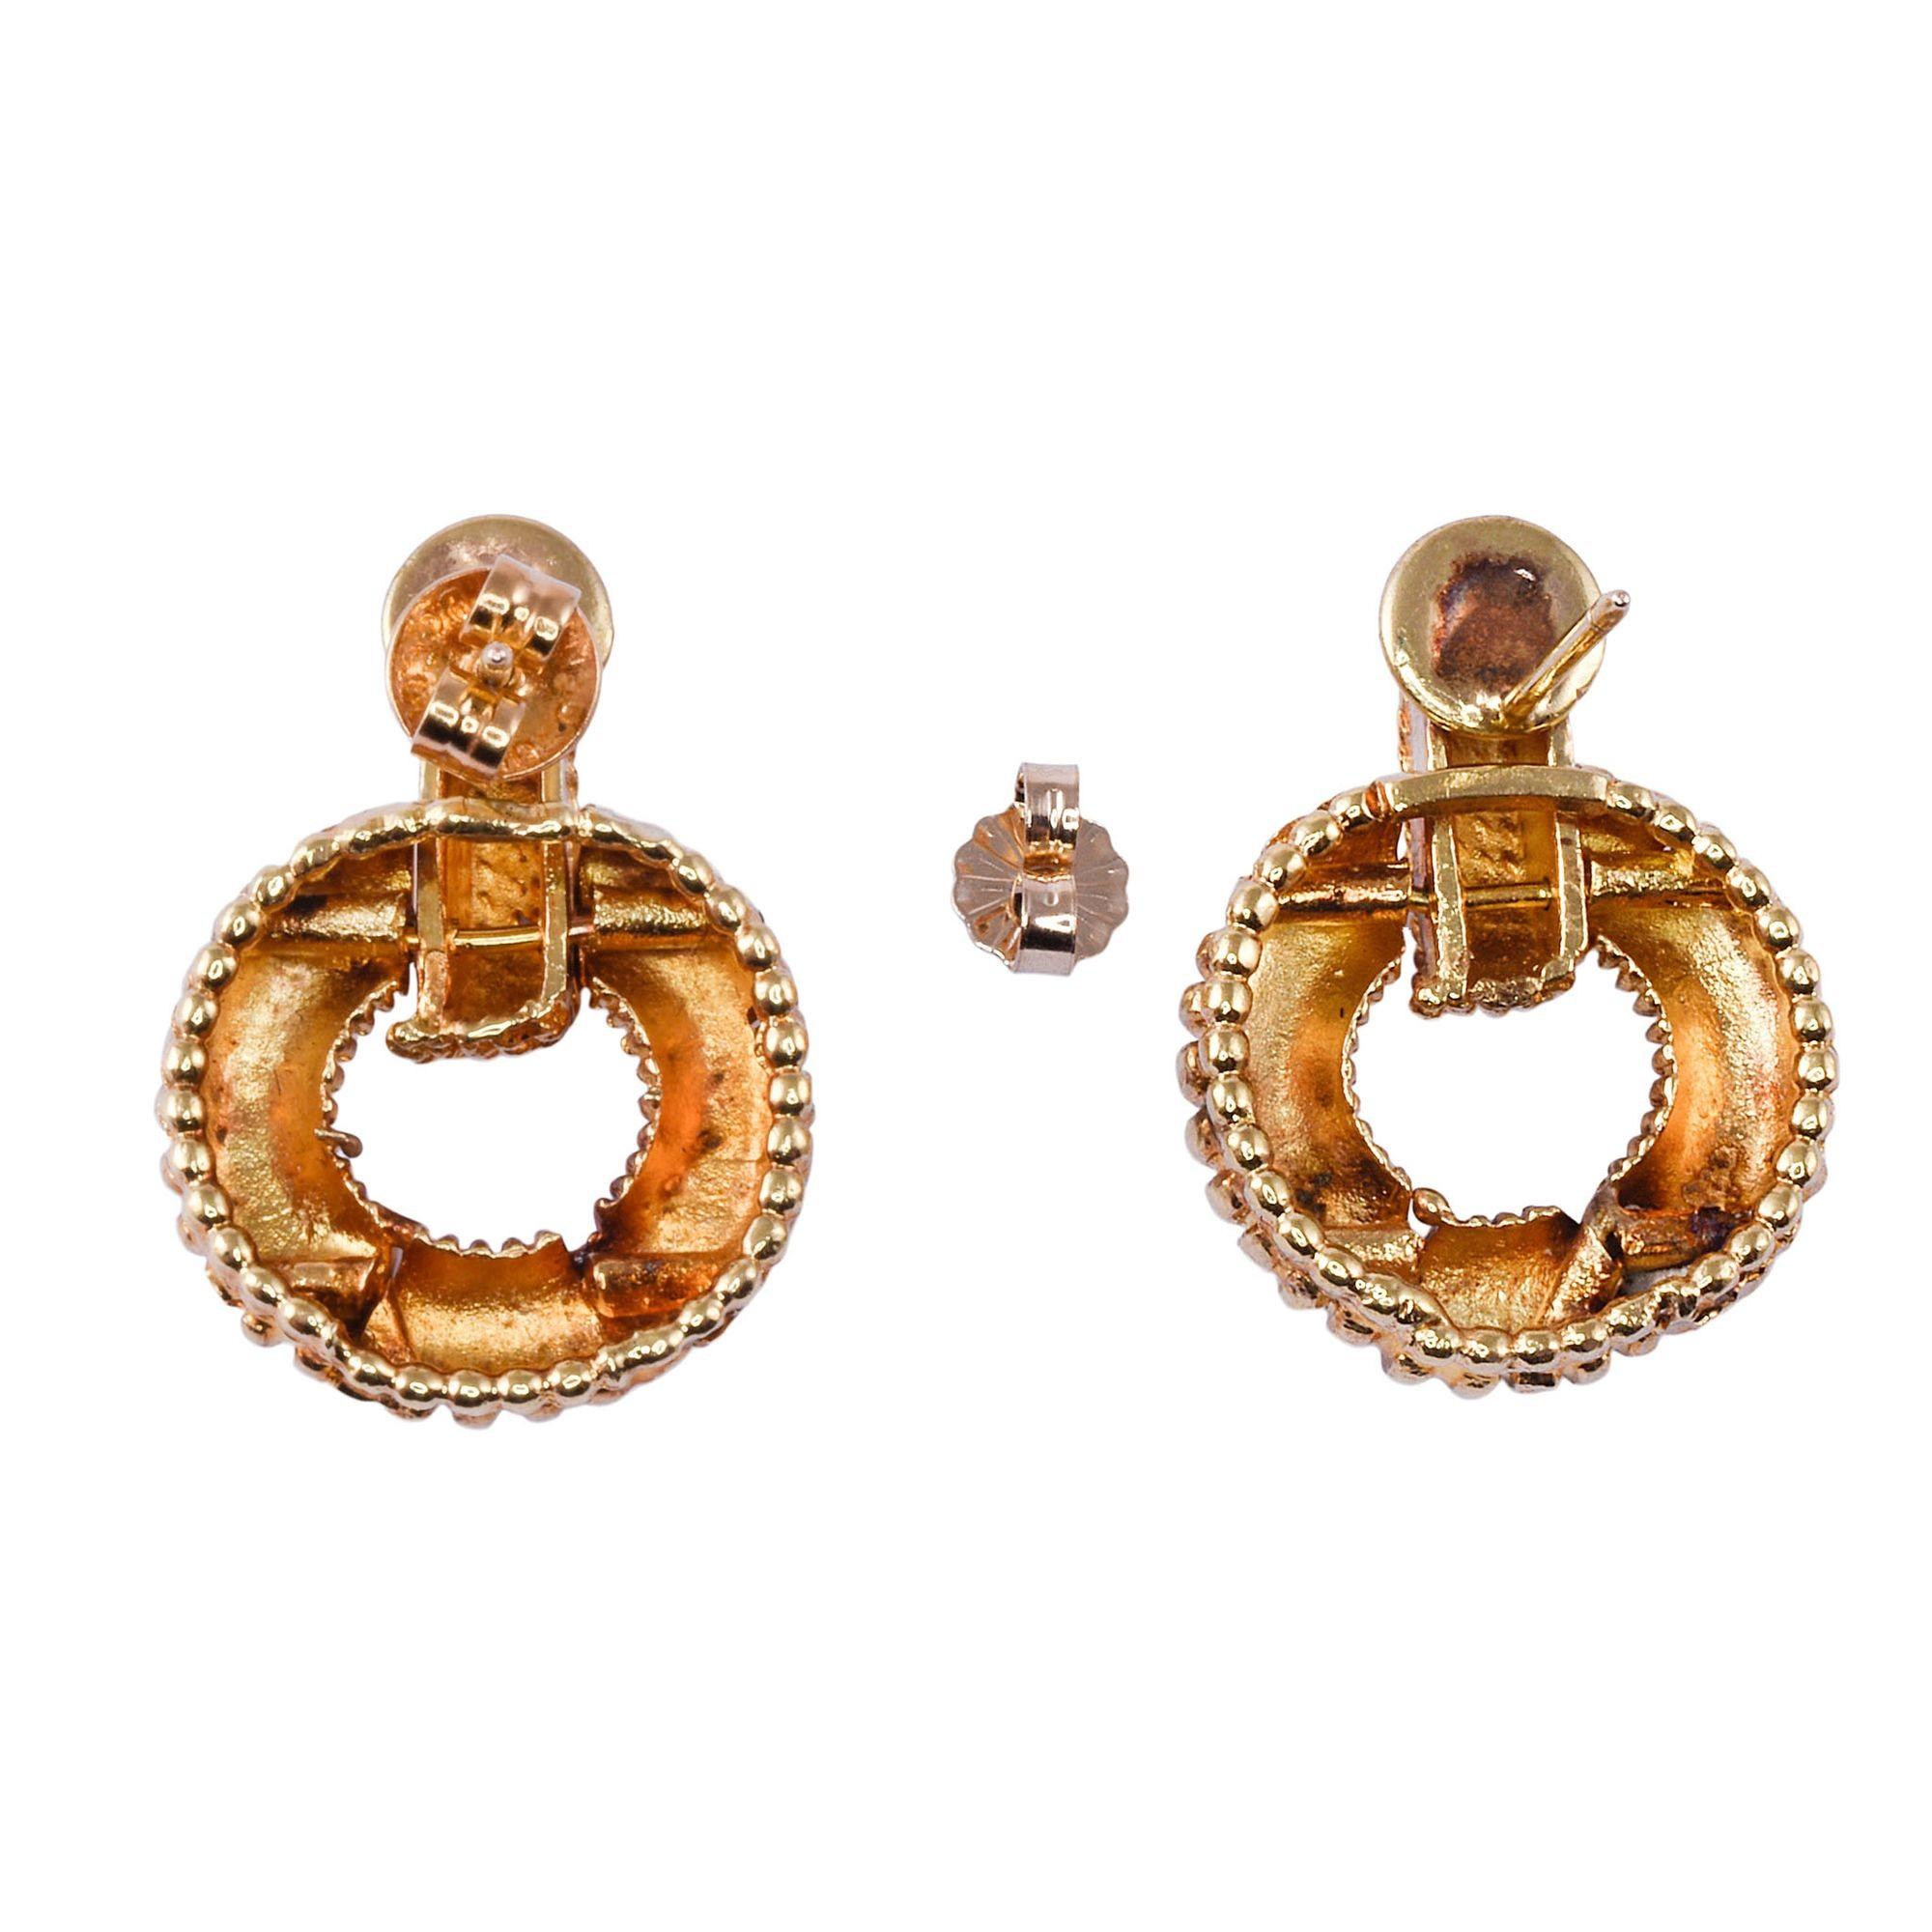 Vintage door knocker style 18K gold earrings, circa 1960-70. These vintage earrings are crafted in 18 karat yellow gold in a scalloped door knocker style weighing 15.8 grams. [KIMH 578]

Dimensions
25mm H x 19mm W